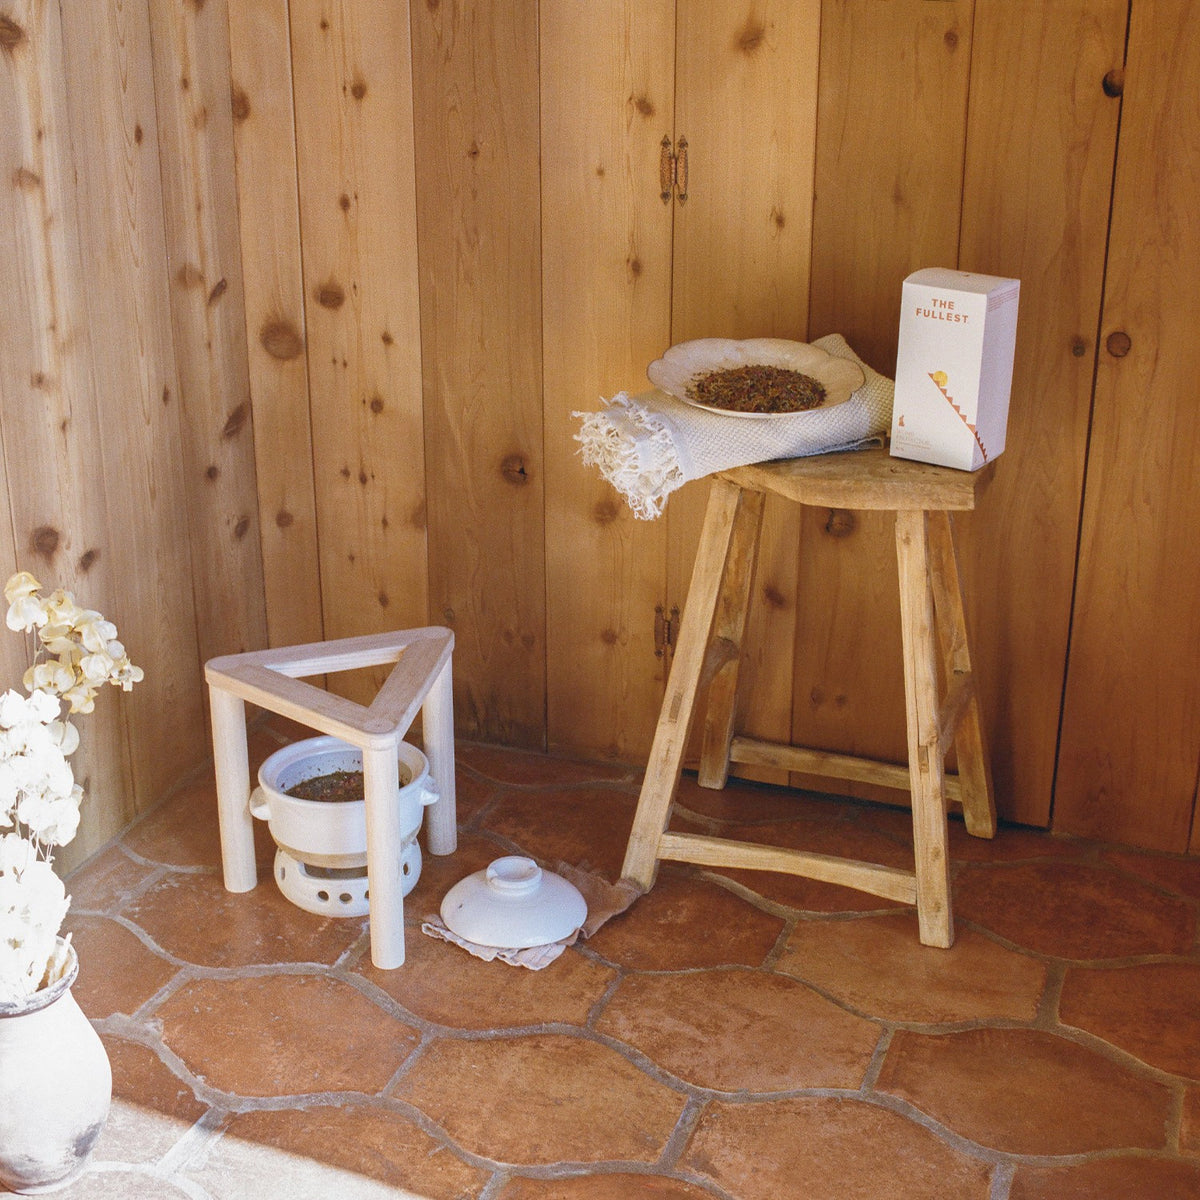 A cozy corner with a Womb Protector Ritual Bundle from THE FULLEST holding a book titled &quot;the poetry of r.&quot; and a bowl of pine cones, next to a small wooden chair with a white ceramic pot underneath.